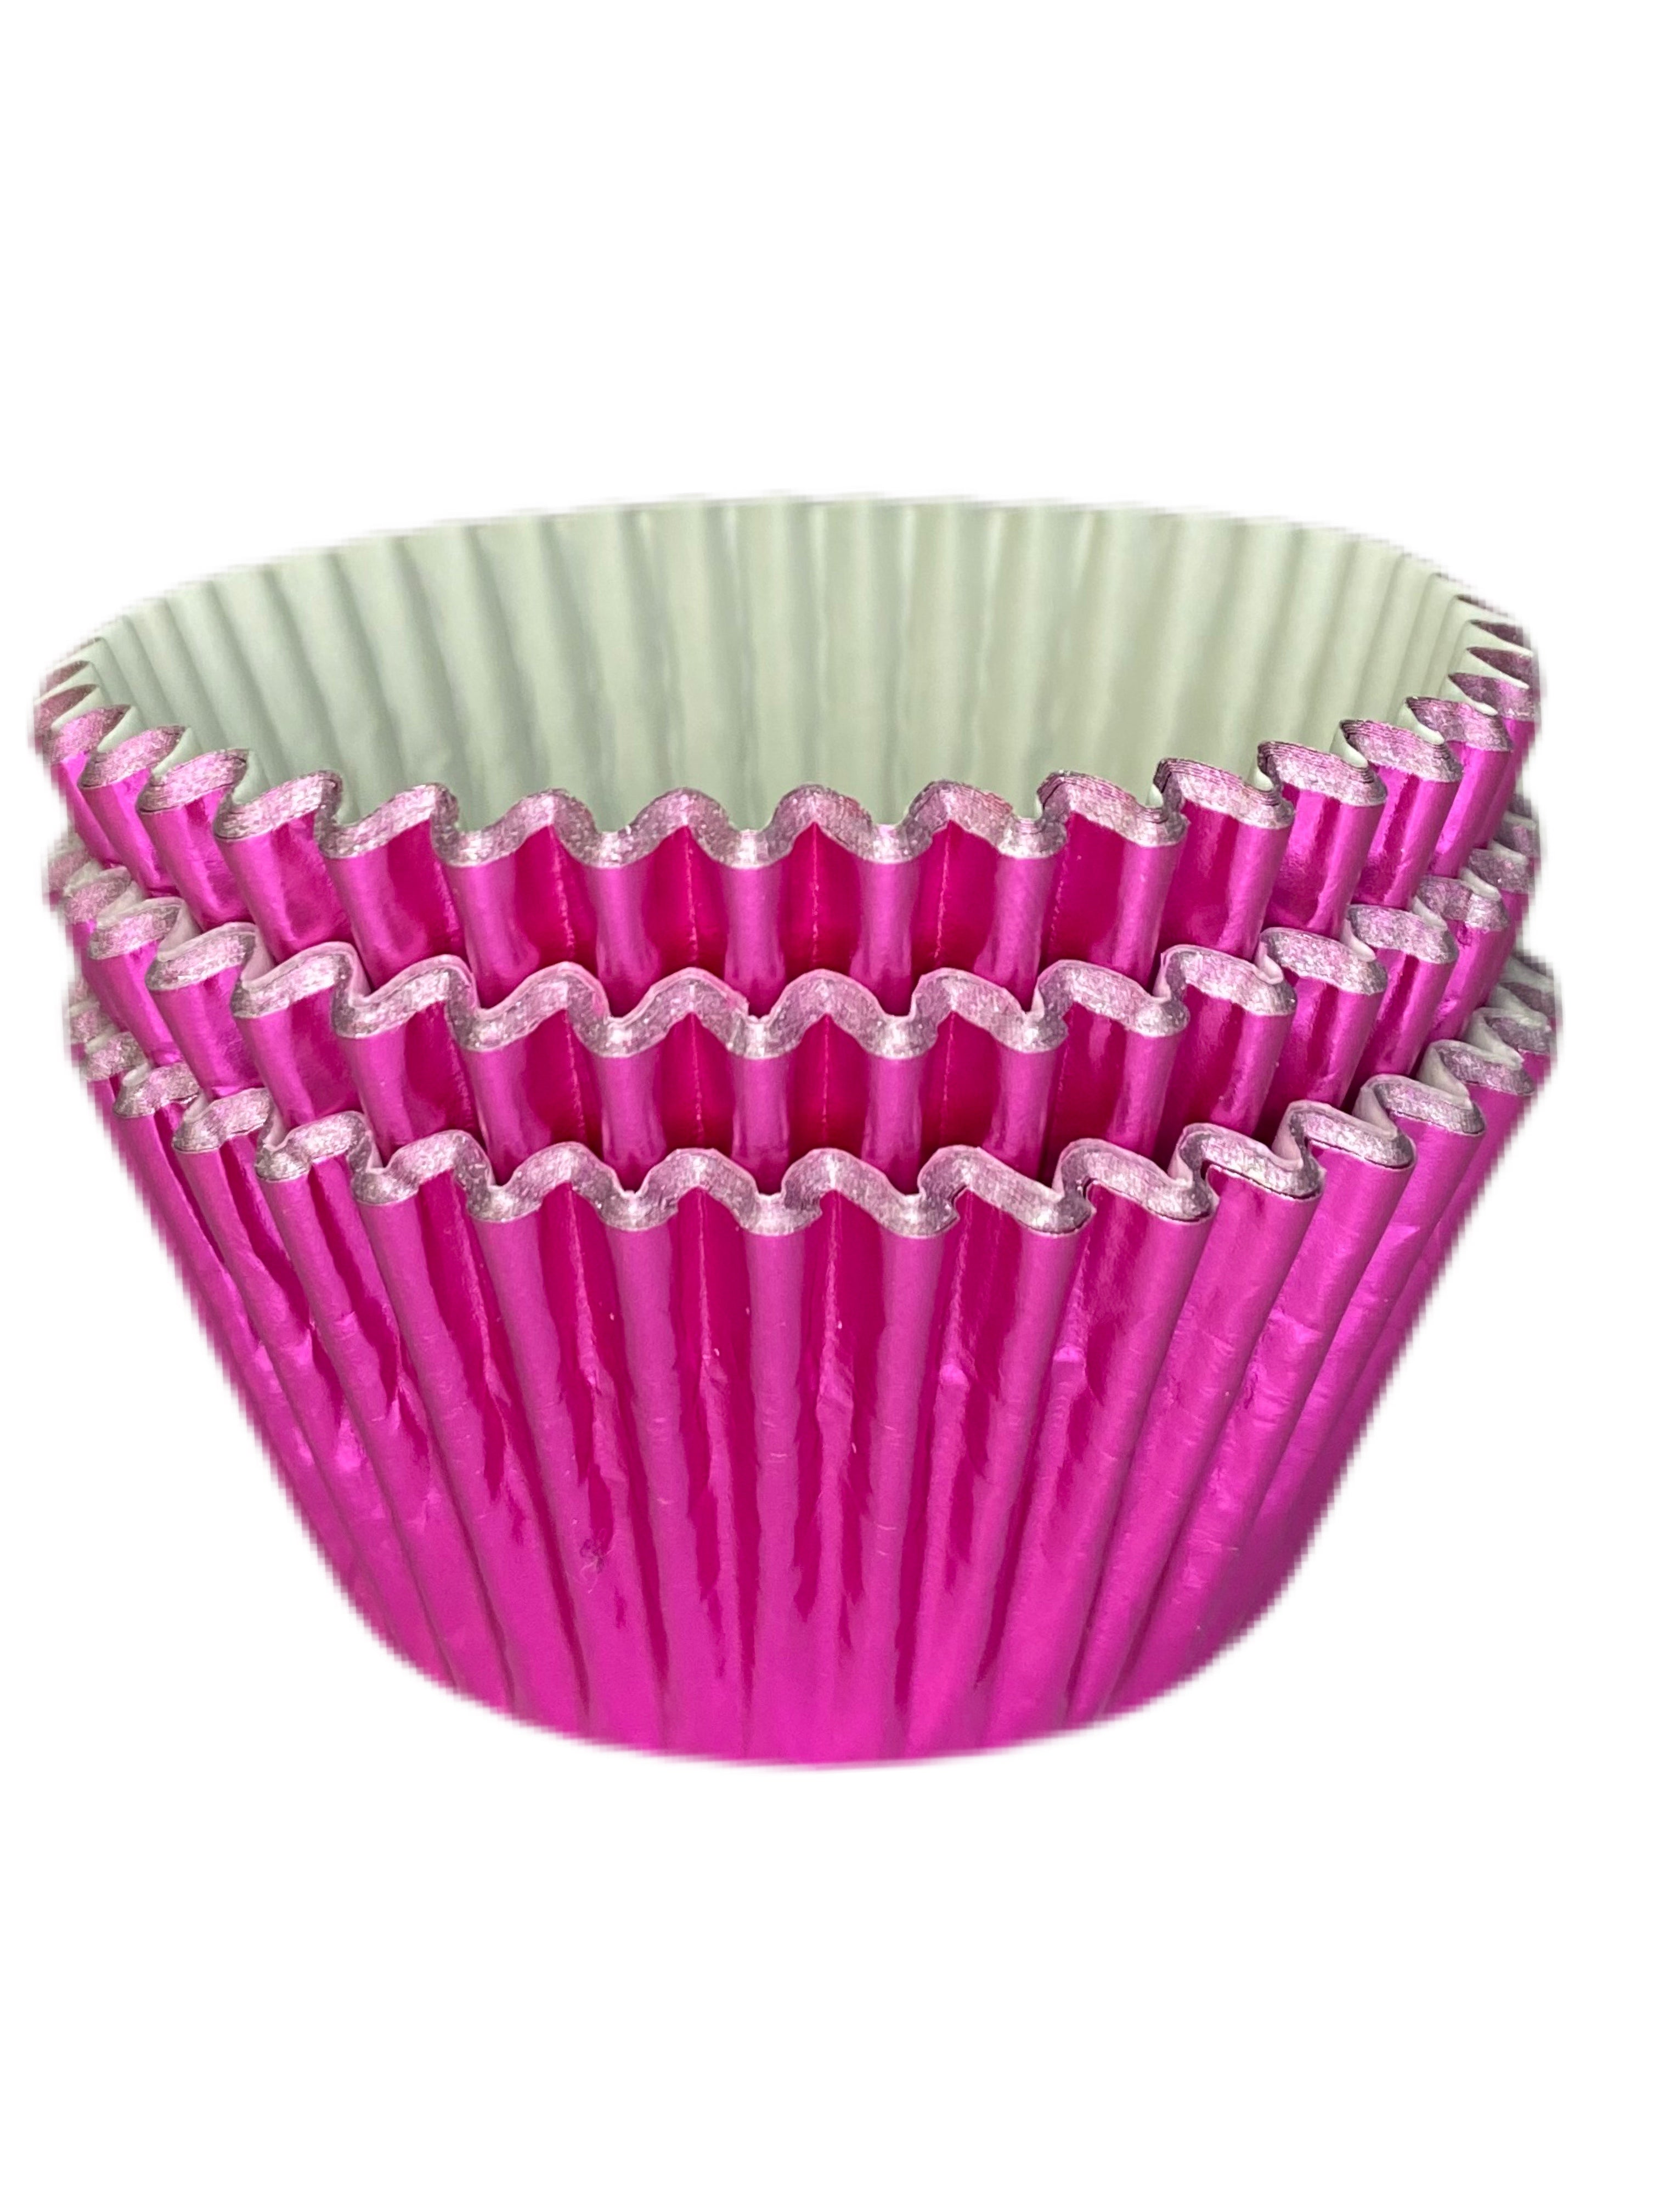 Cerise Pink Foil Cupcake / Muffin Baking Cases Pack of Approx 36 - Kate's Cupboard